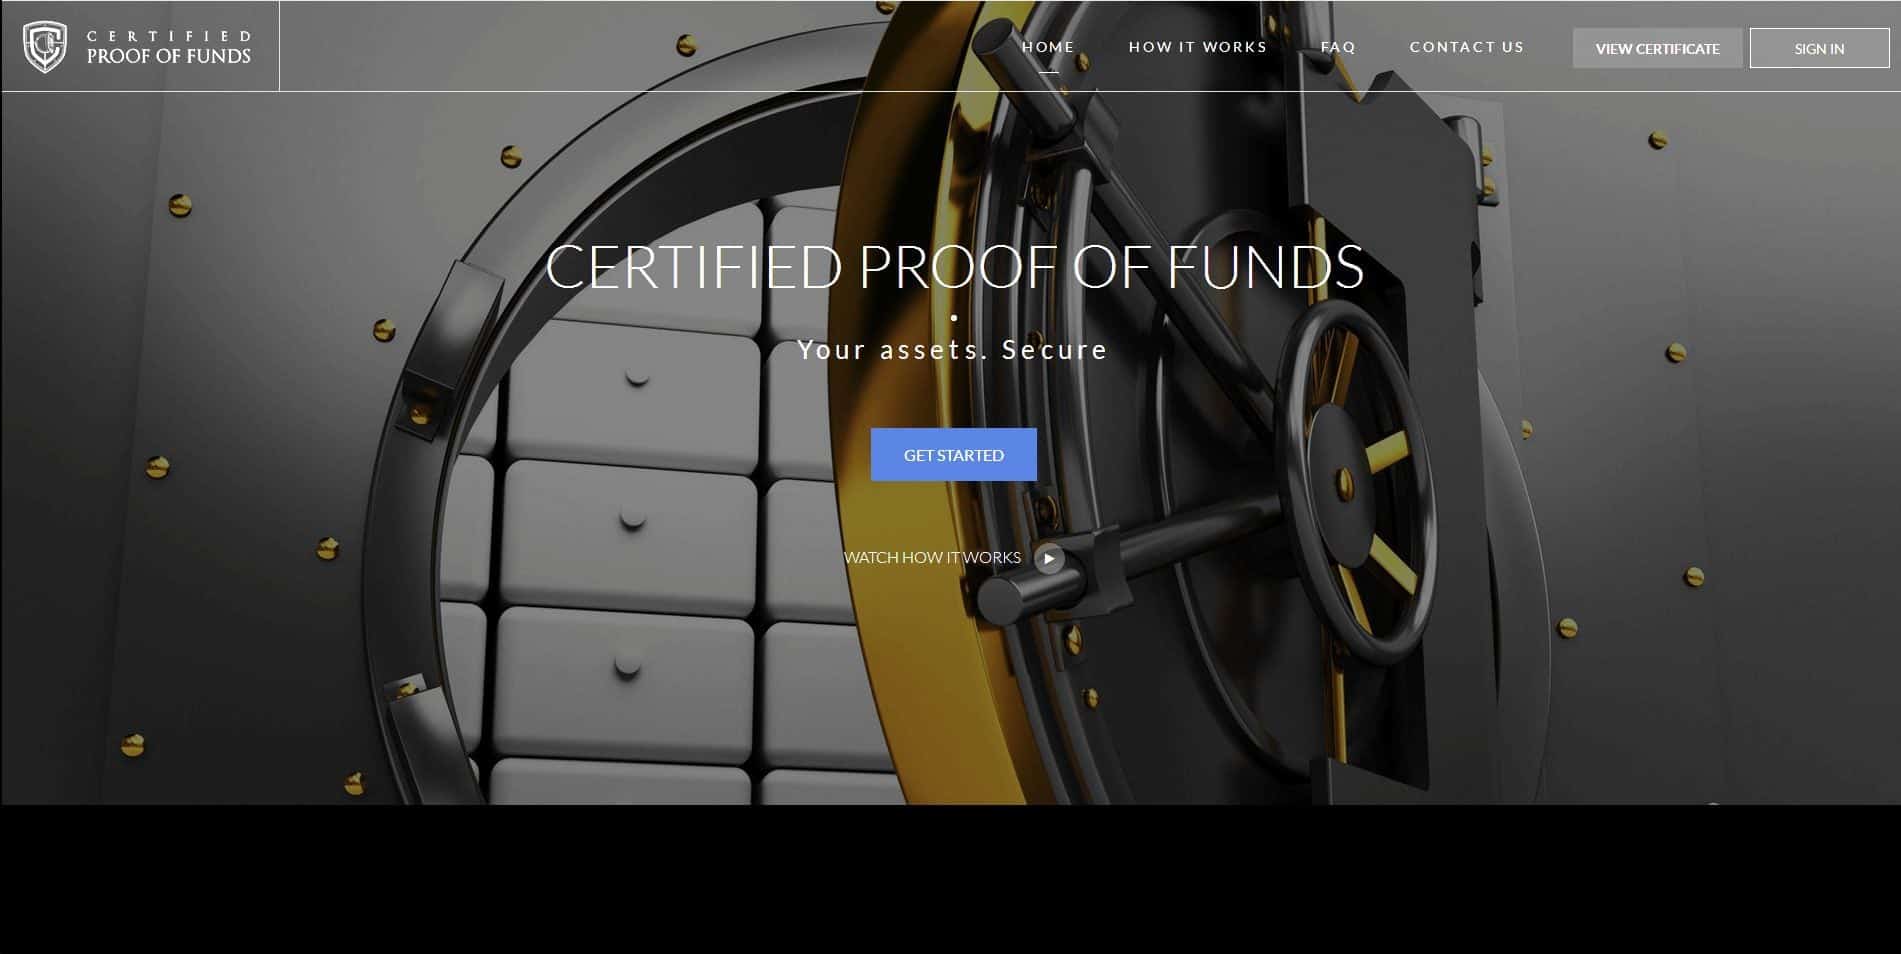 Certified Proof of Funds’ helps clients demonstrate the funds